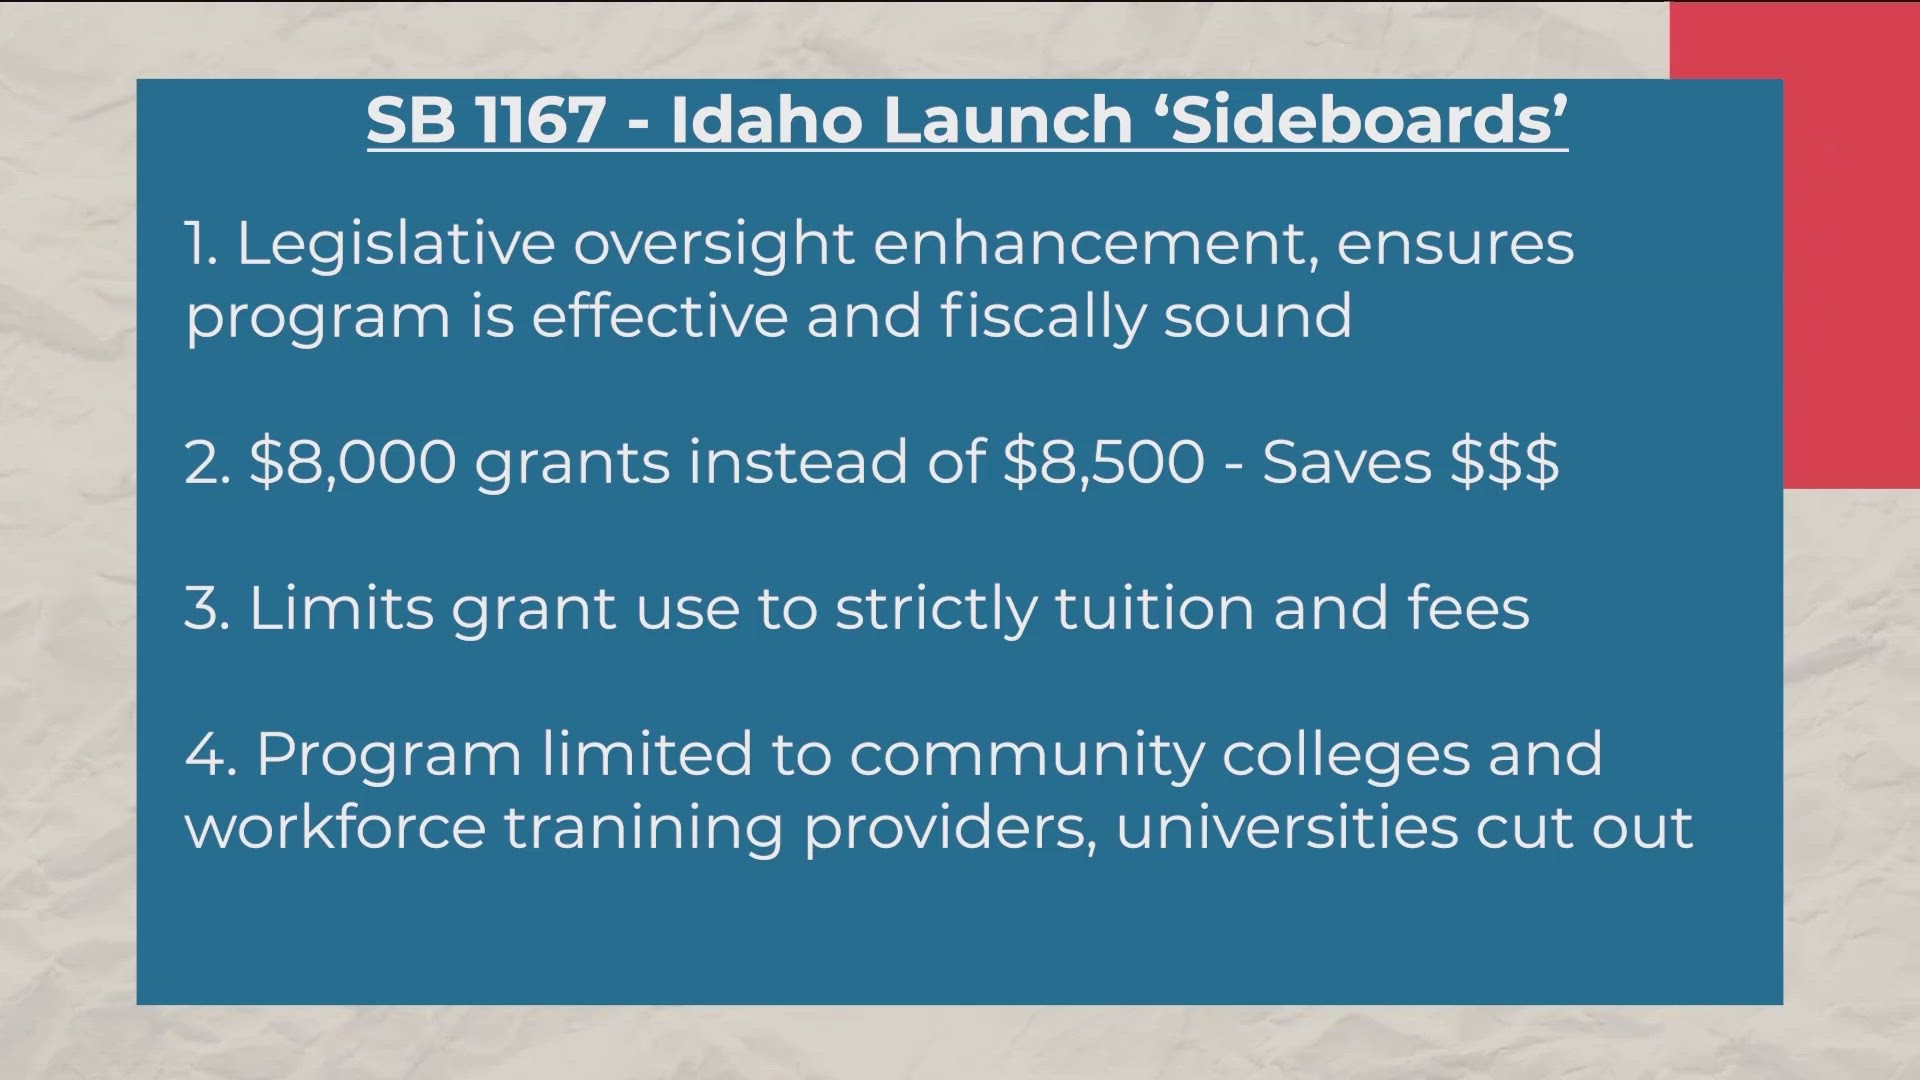 'Idaho Launch' has had some bumps in the road. A trailer bill adds restrictions.